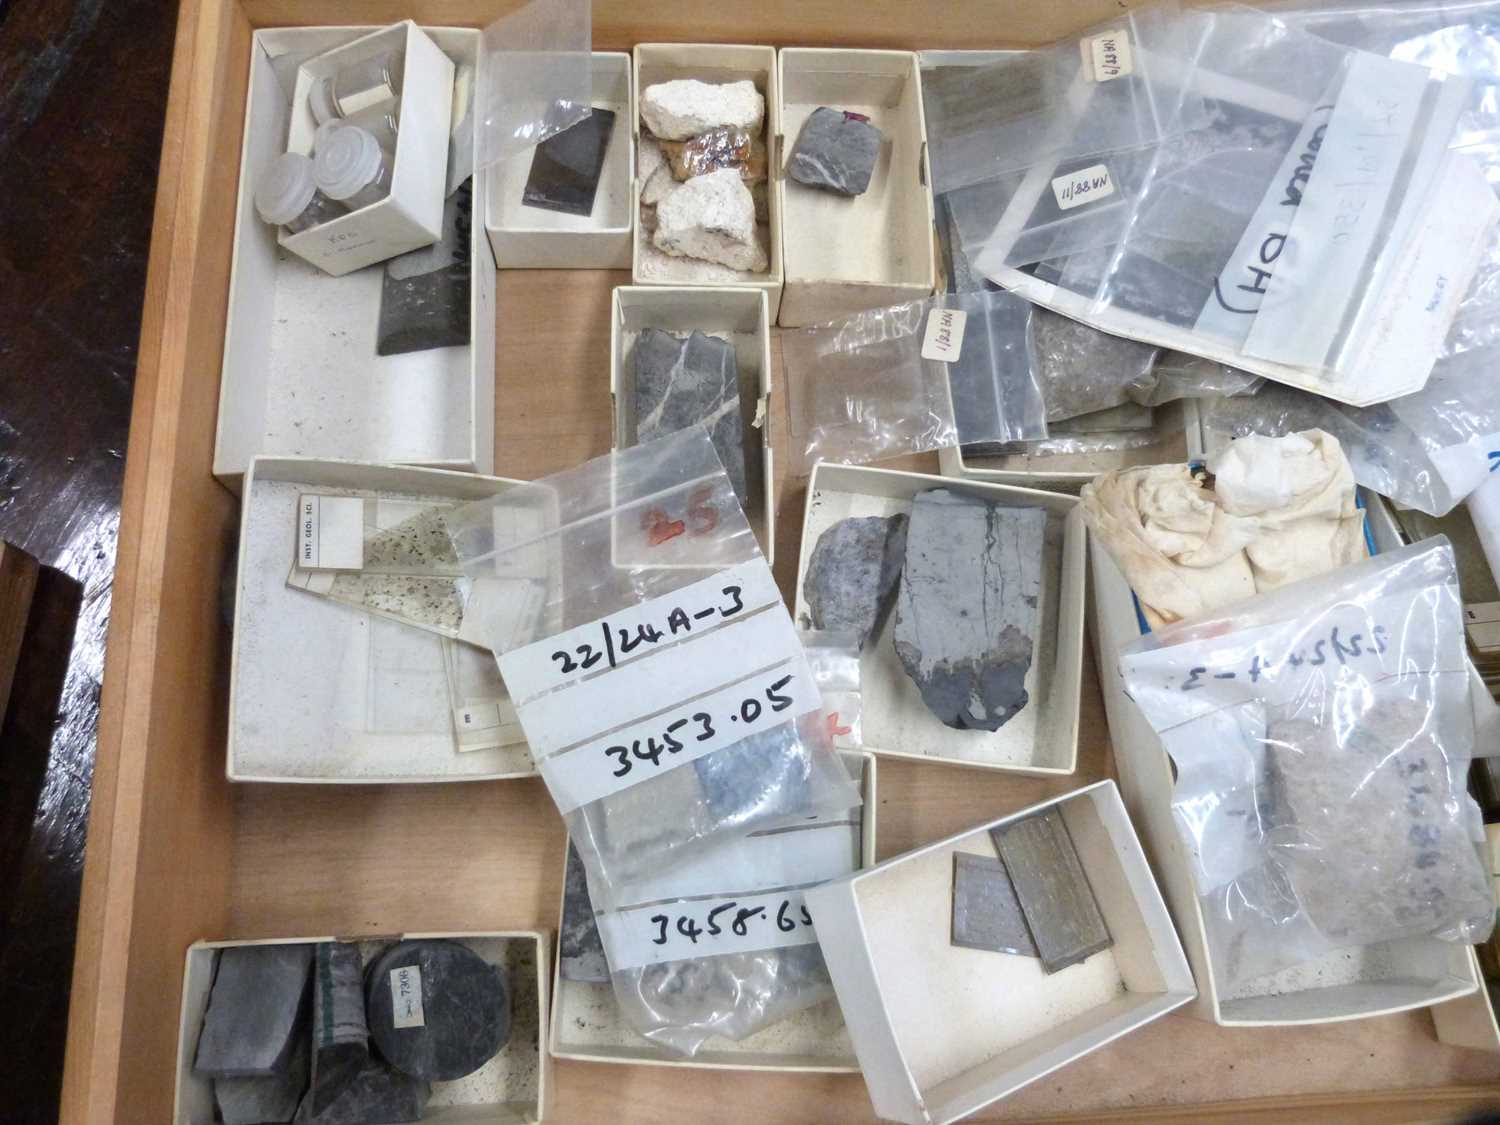 Collection of mineralogical and soil samples housed in wooden storage boxes - Image 12 of 12